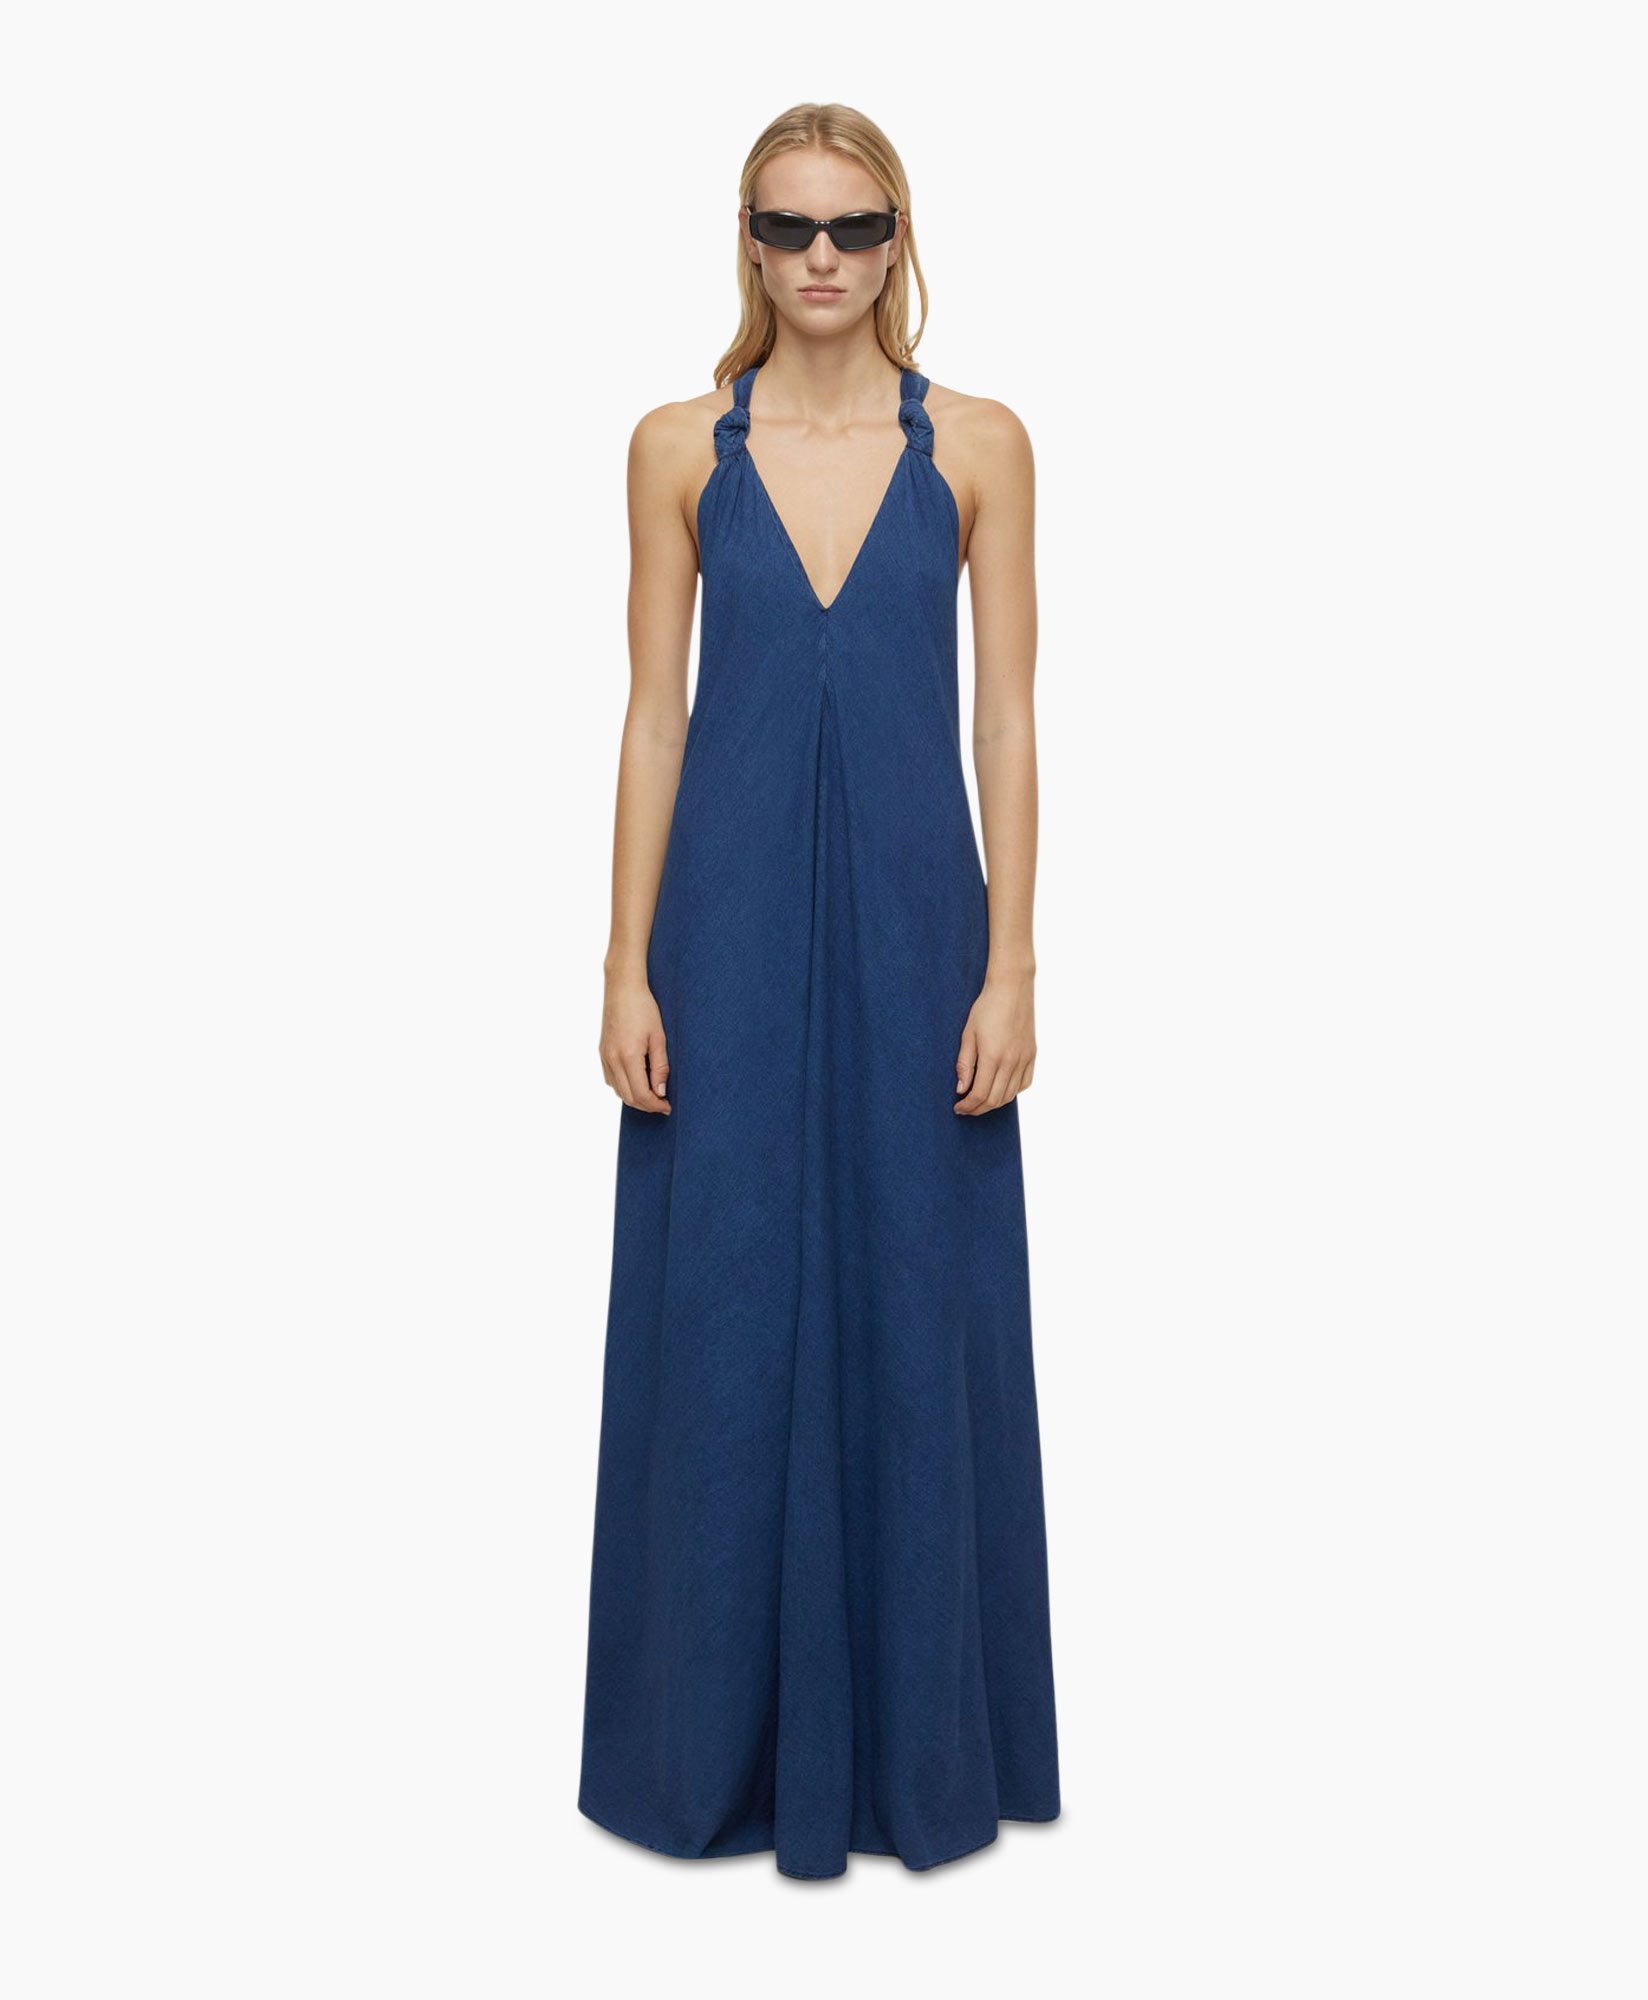 Maxi Jurk Maxi Knotted Straps Donker Blauw